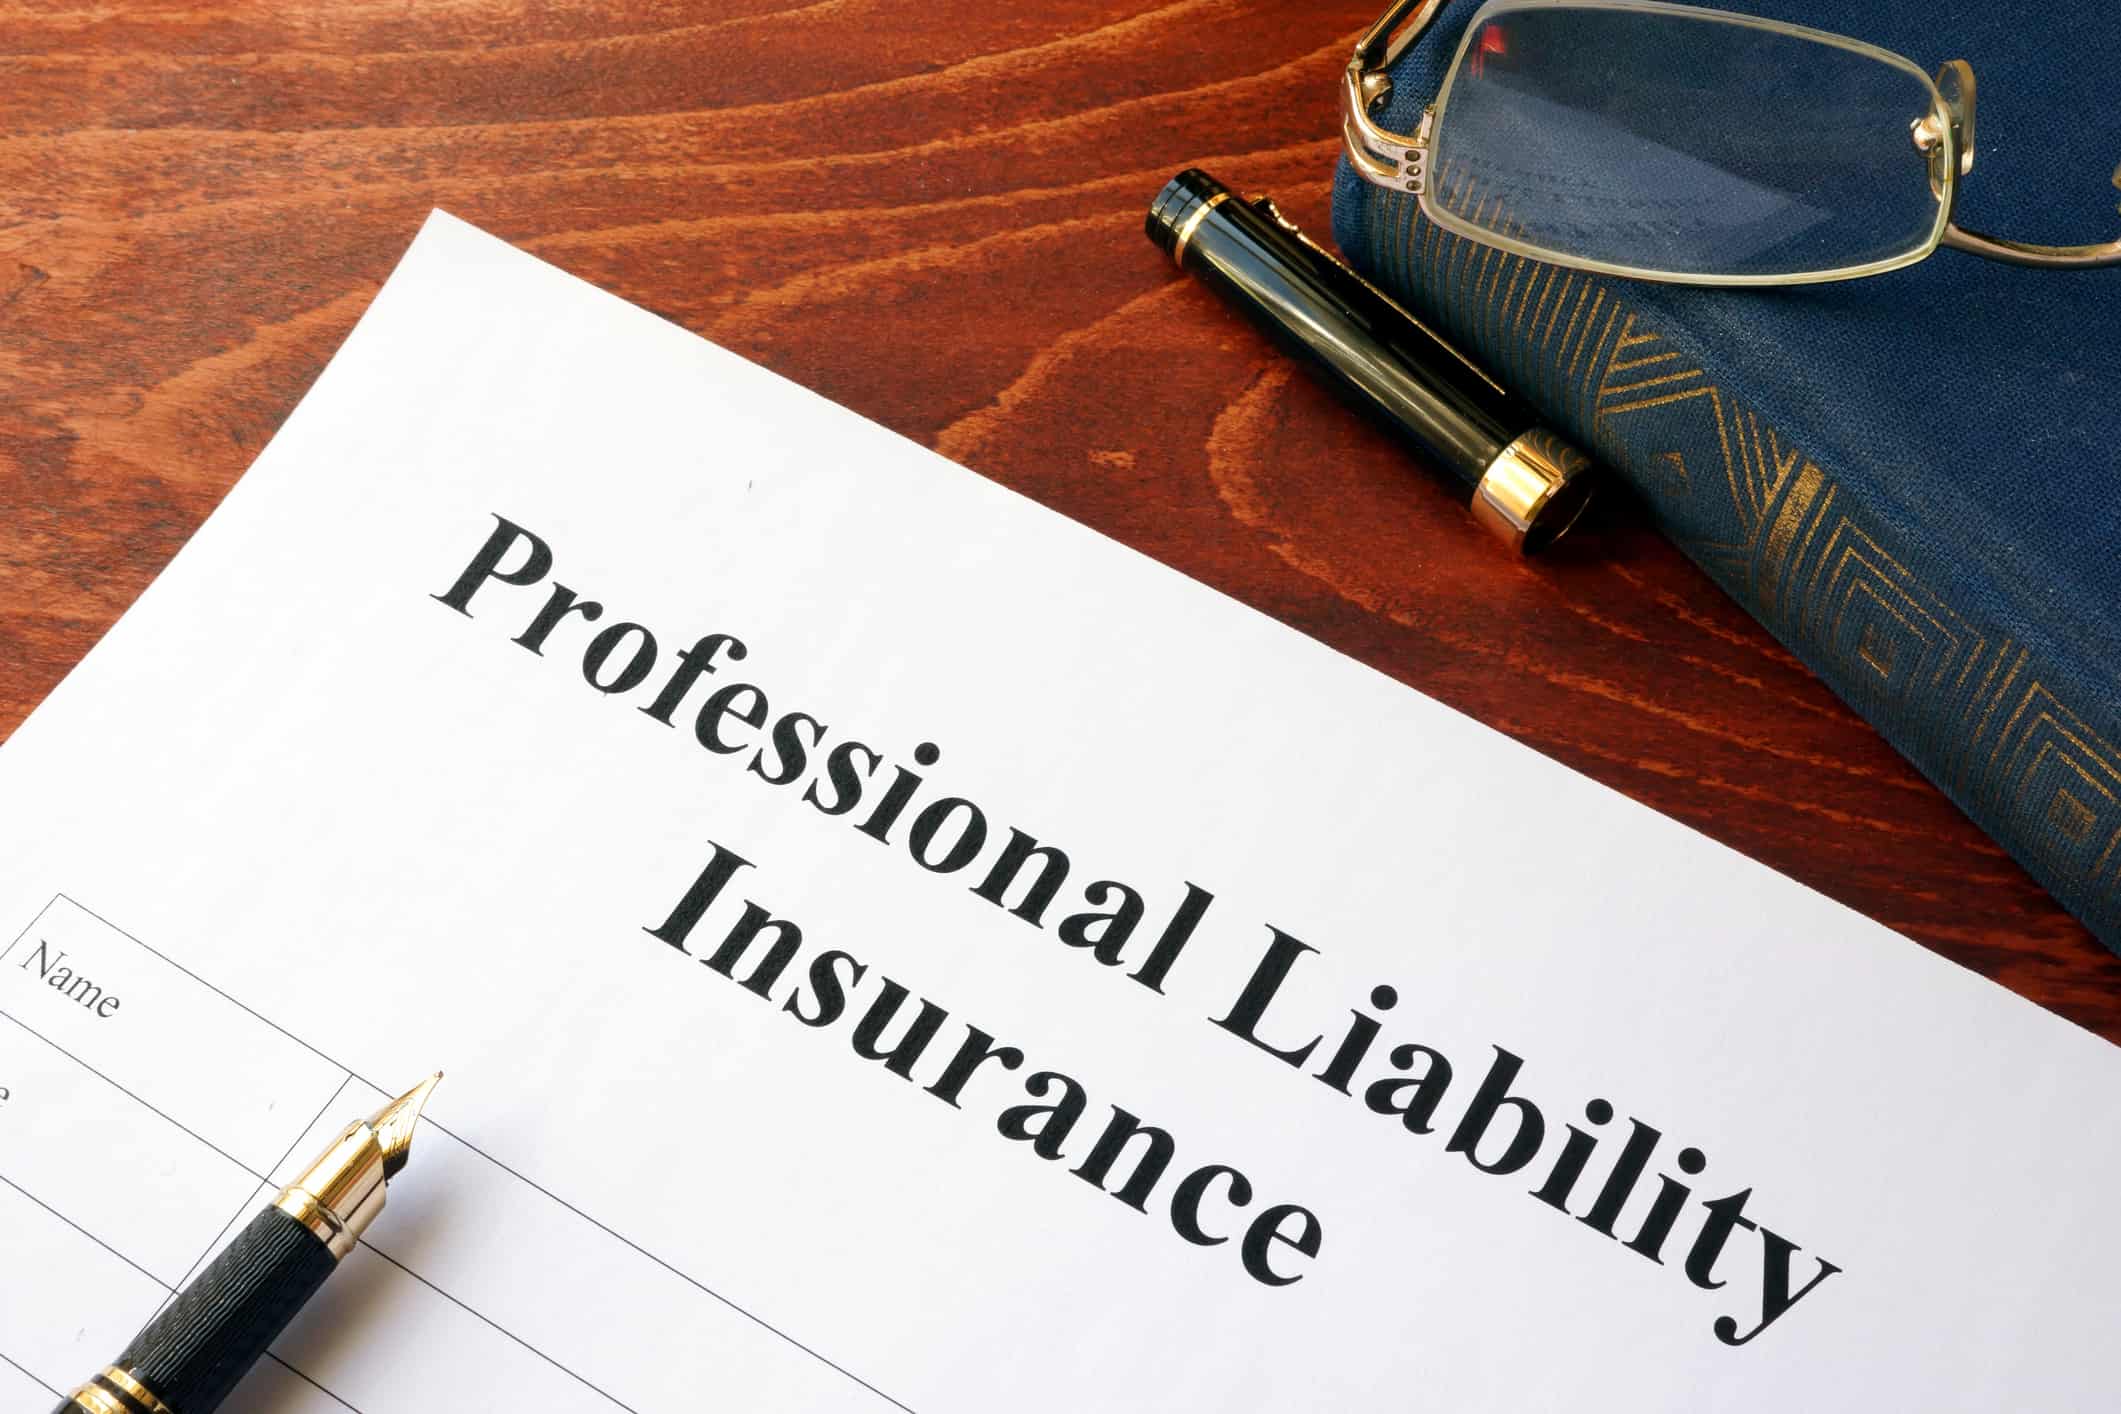 Professional liability insurance policy on a table.